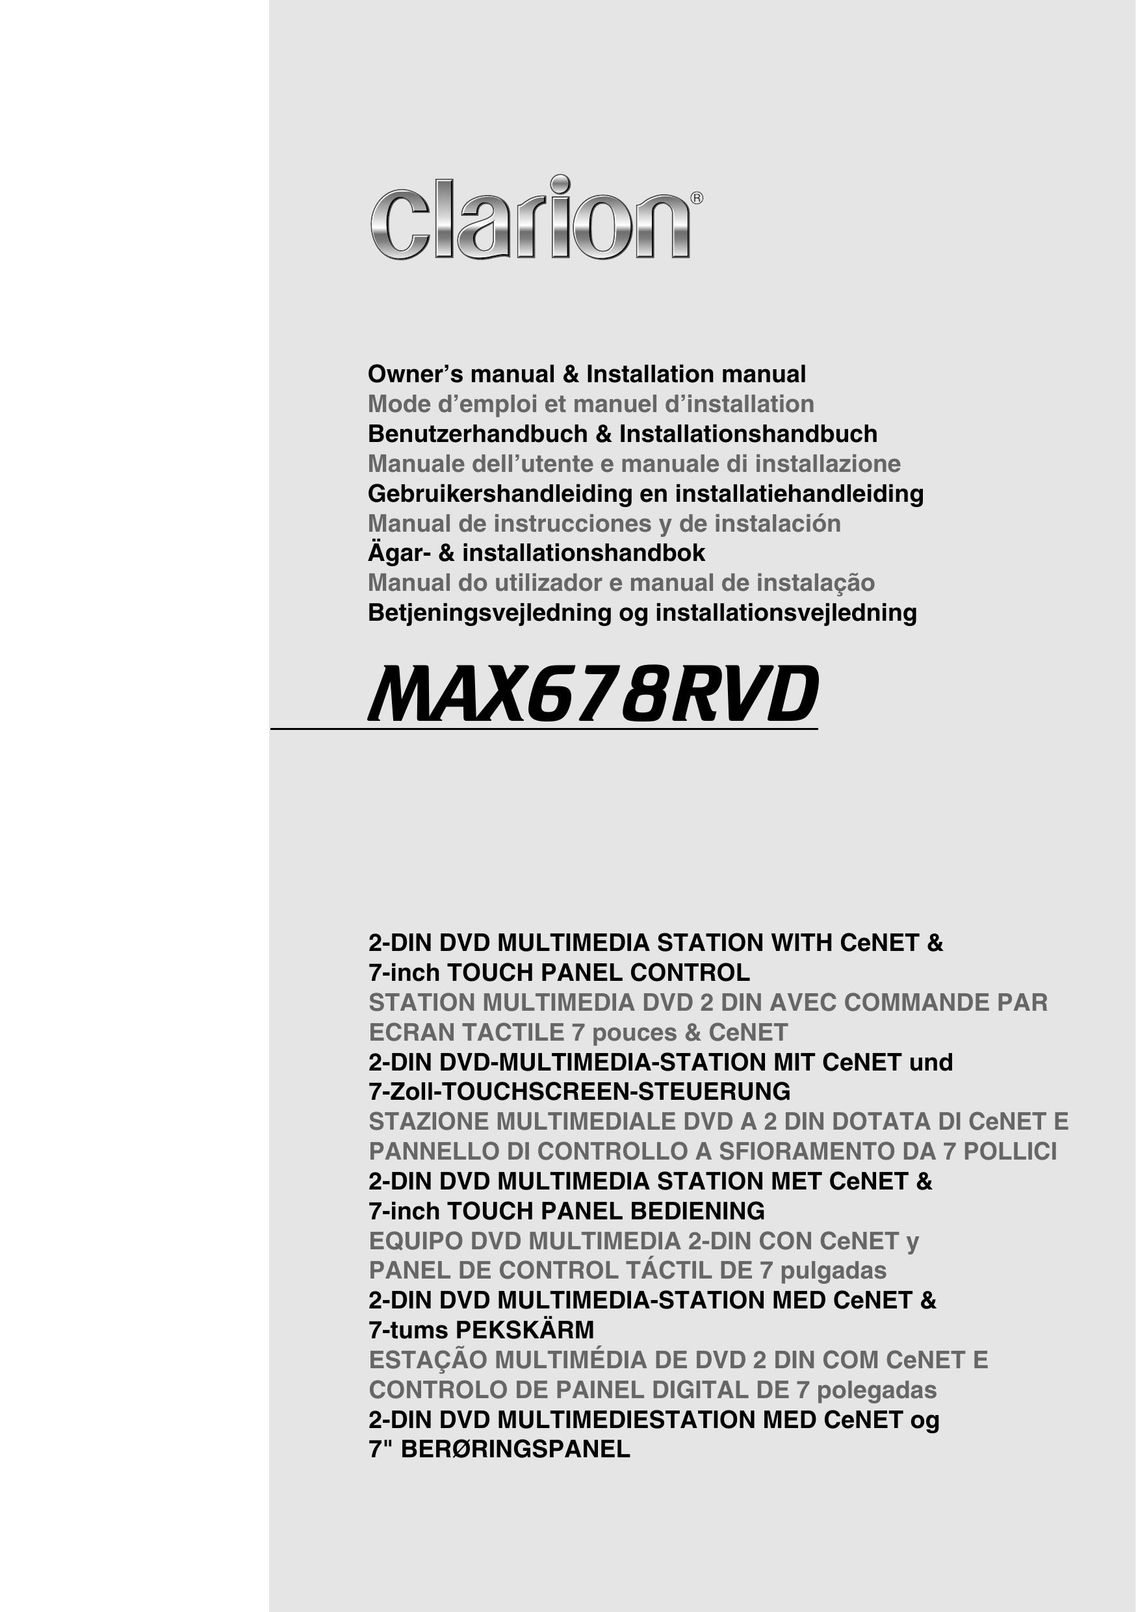 Clarion MAX678RVD DVD Player User Manual